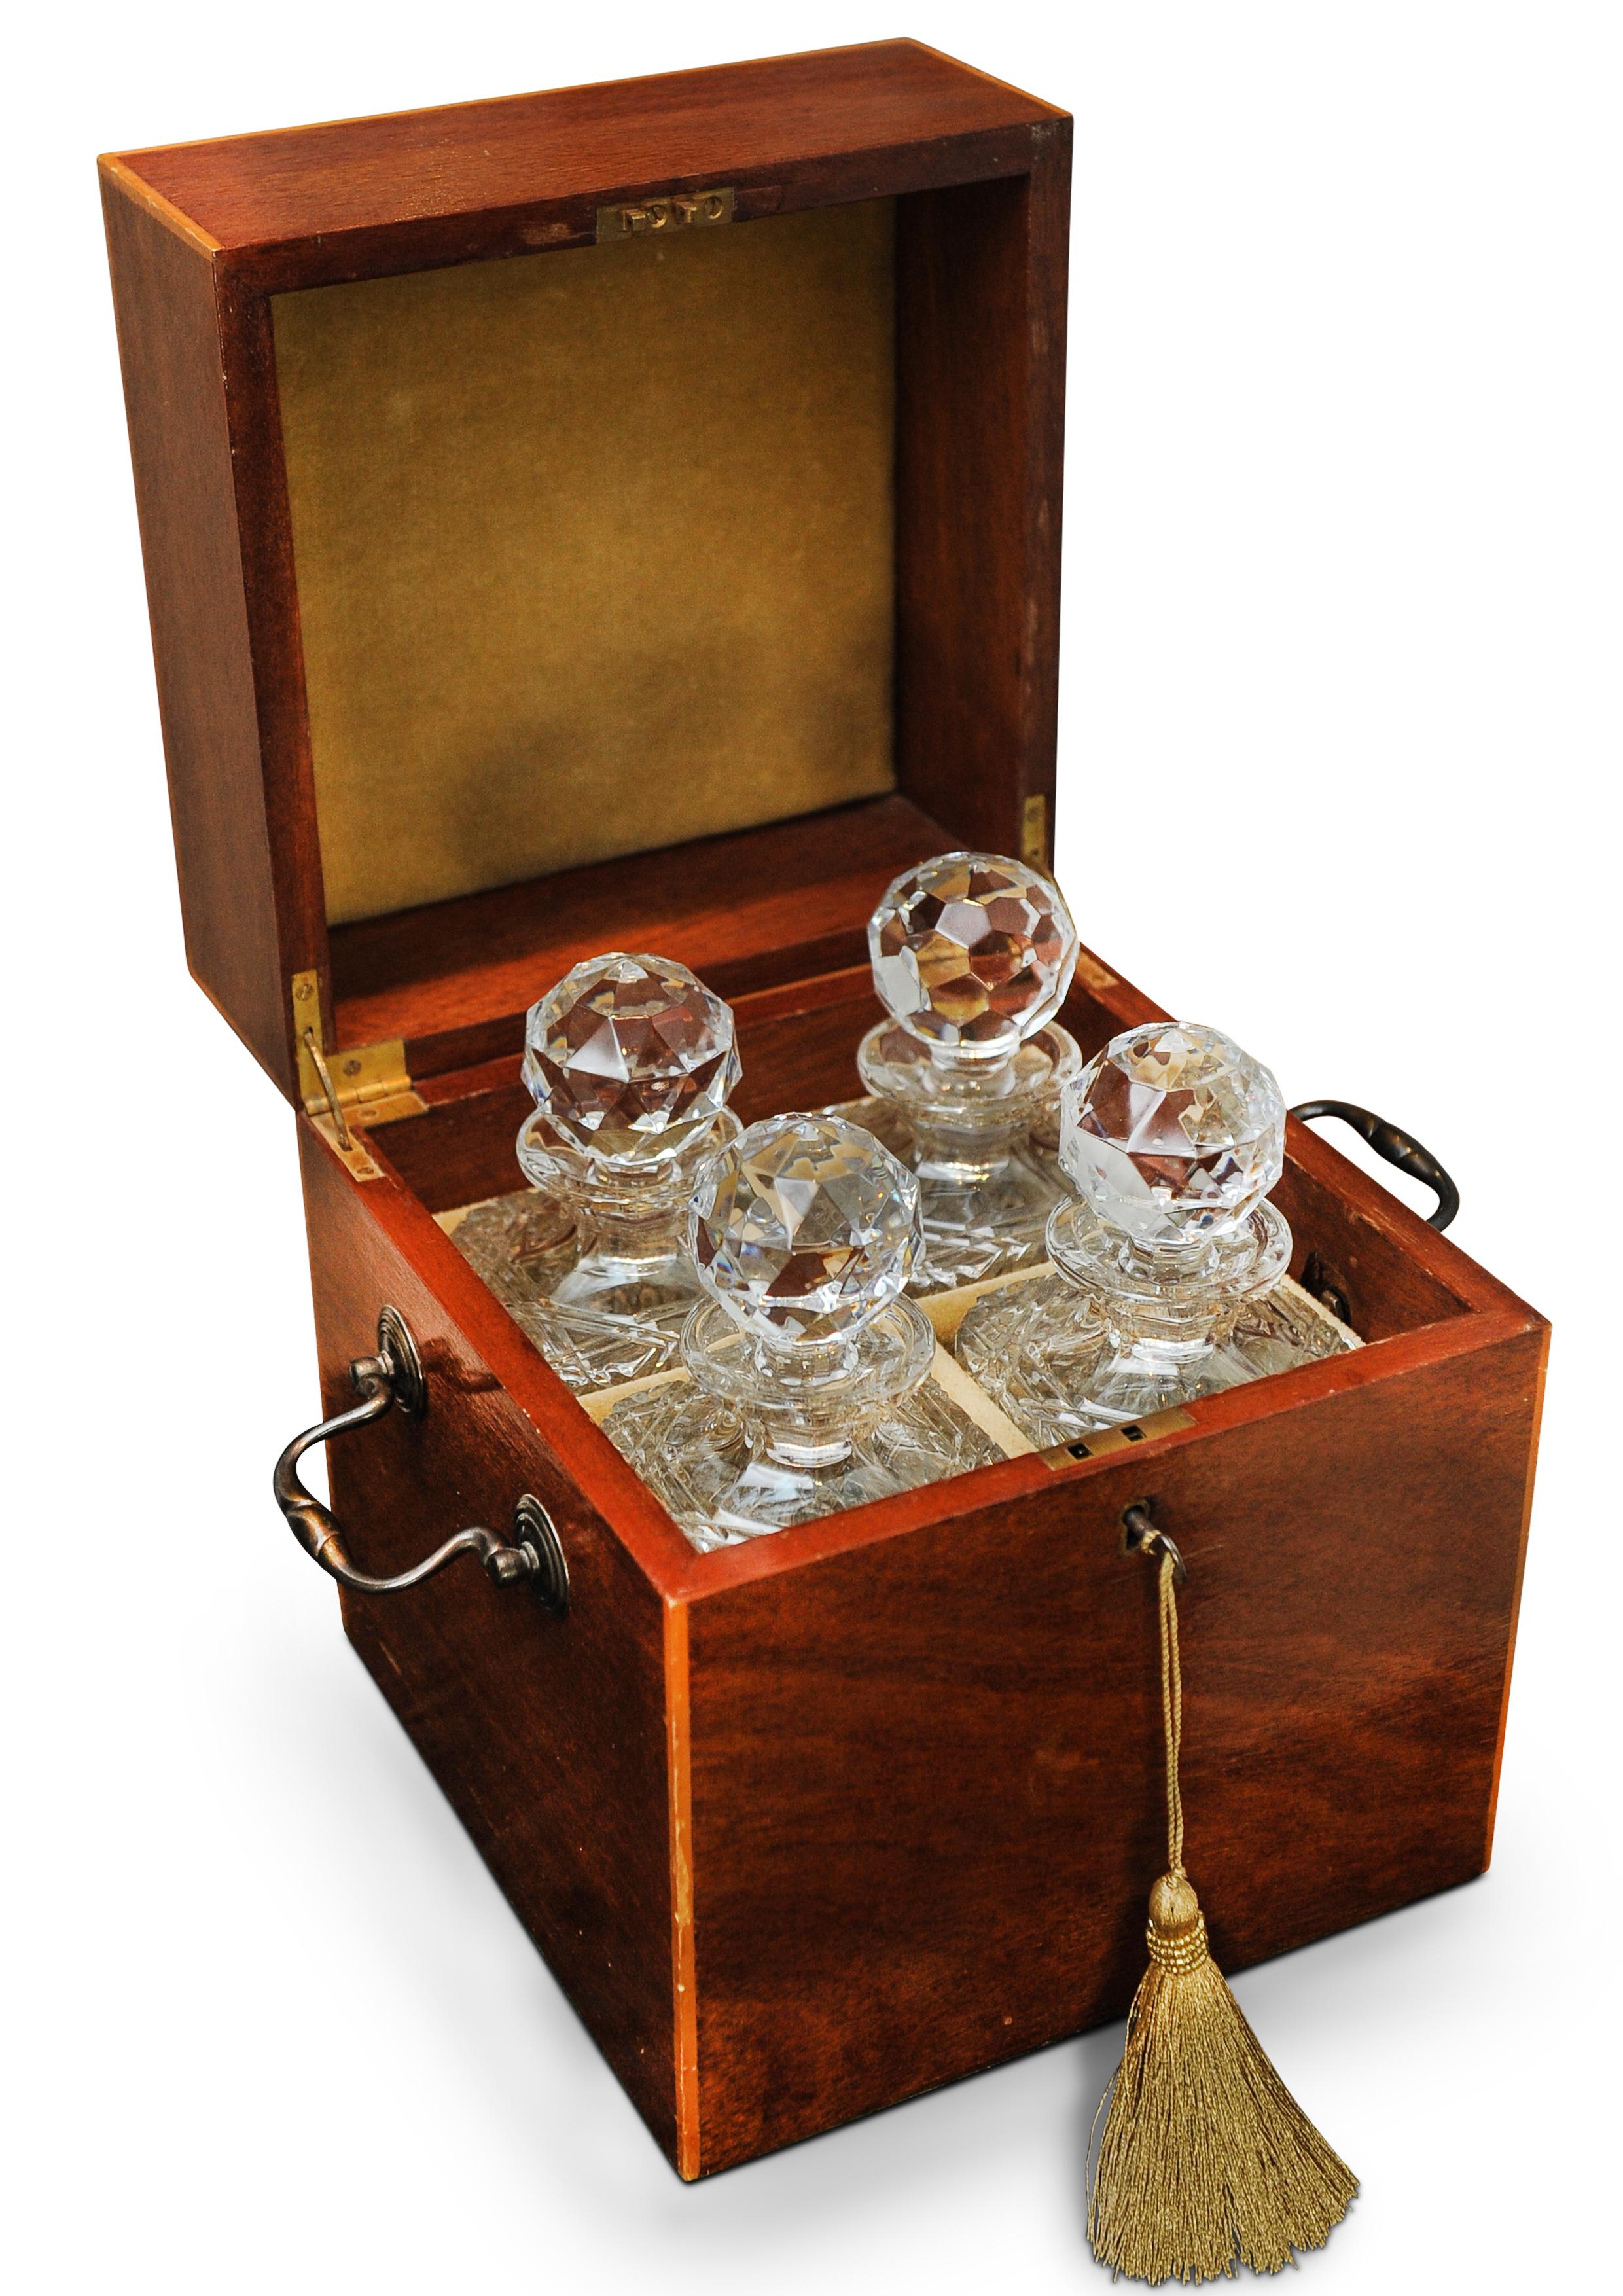 Cut Glass Victorian Sheraton Revival Inlaid Decanter Box, With Four Atlantis Decanters For Sale